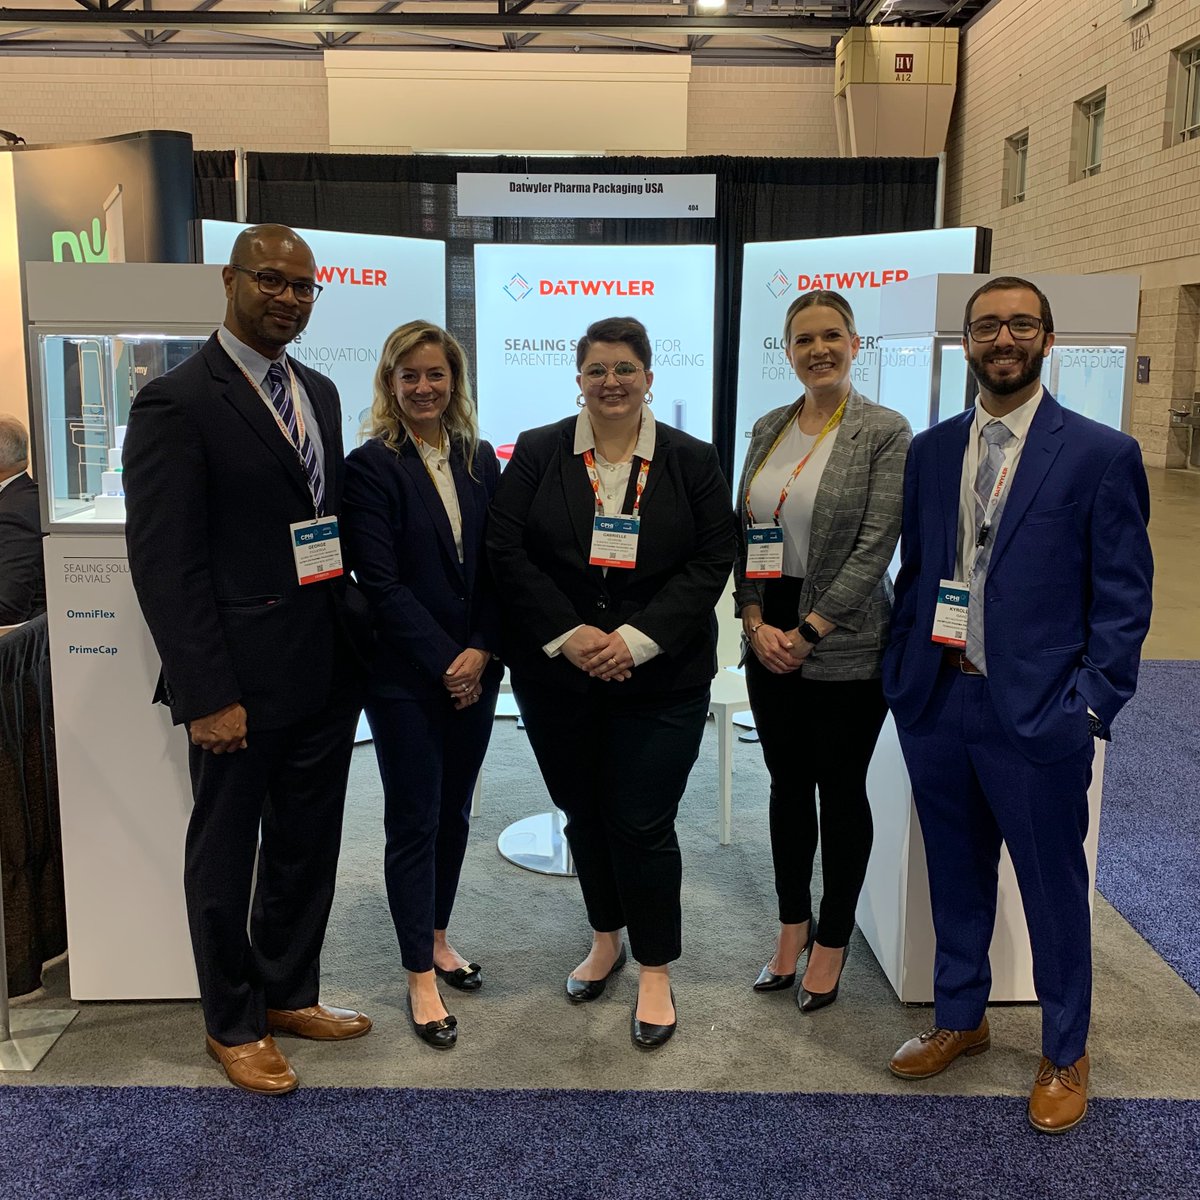 Stop by booth #404 at CPhI North America today to meet our team of experts! #DiscoverDatwyler #CPhINA